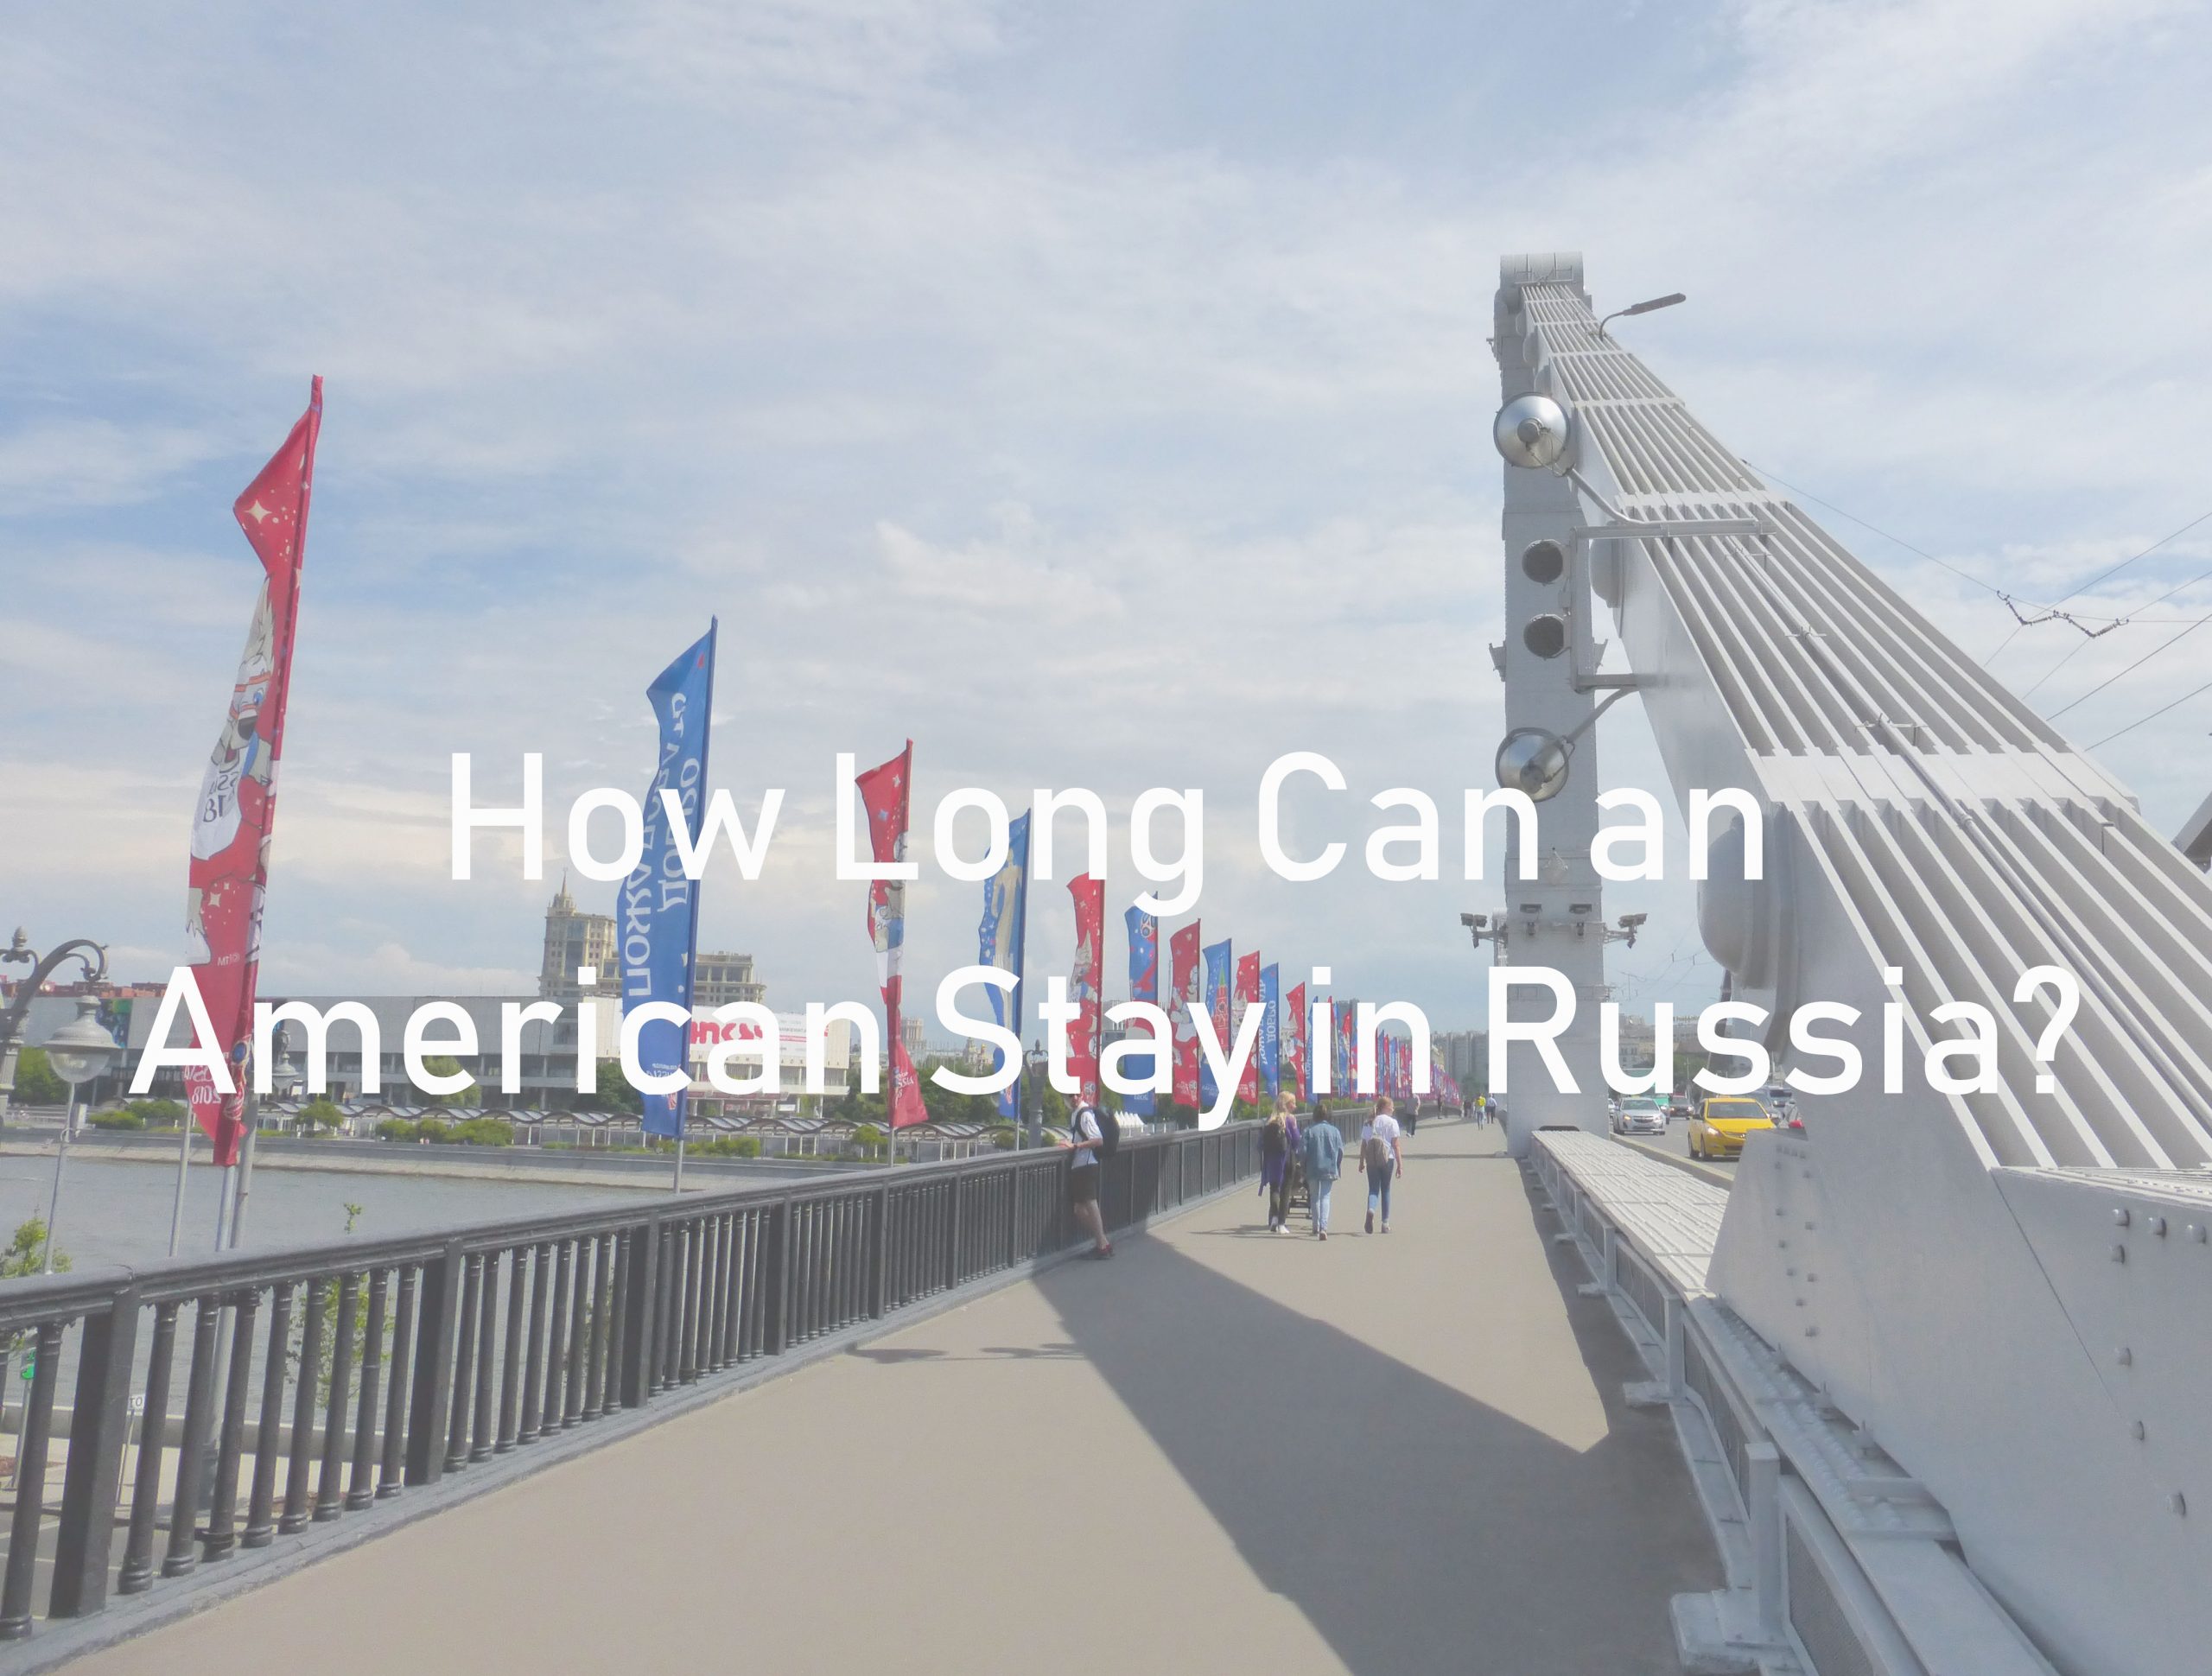 How Long Can an American Stay in Russia?